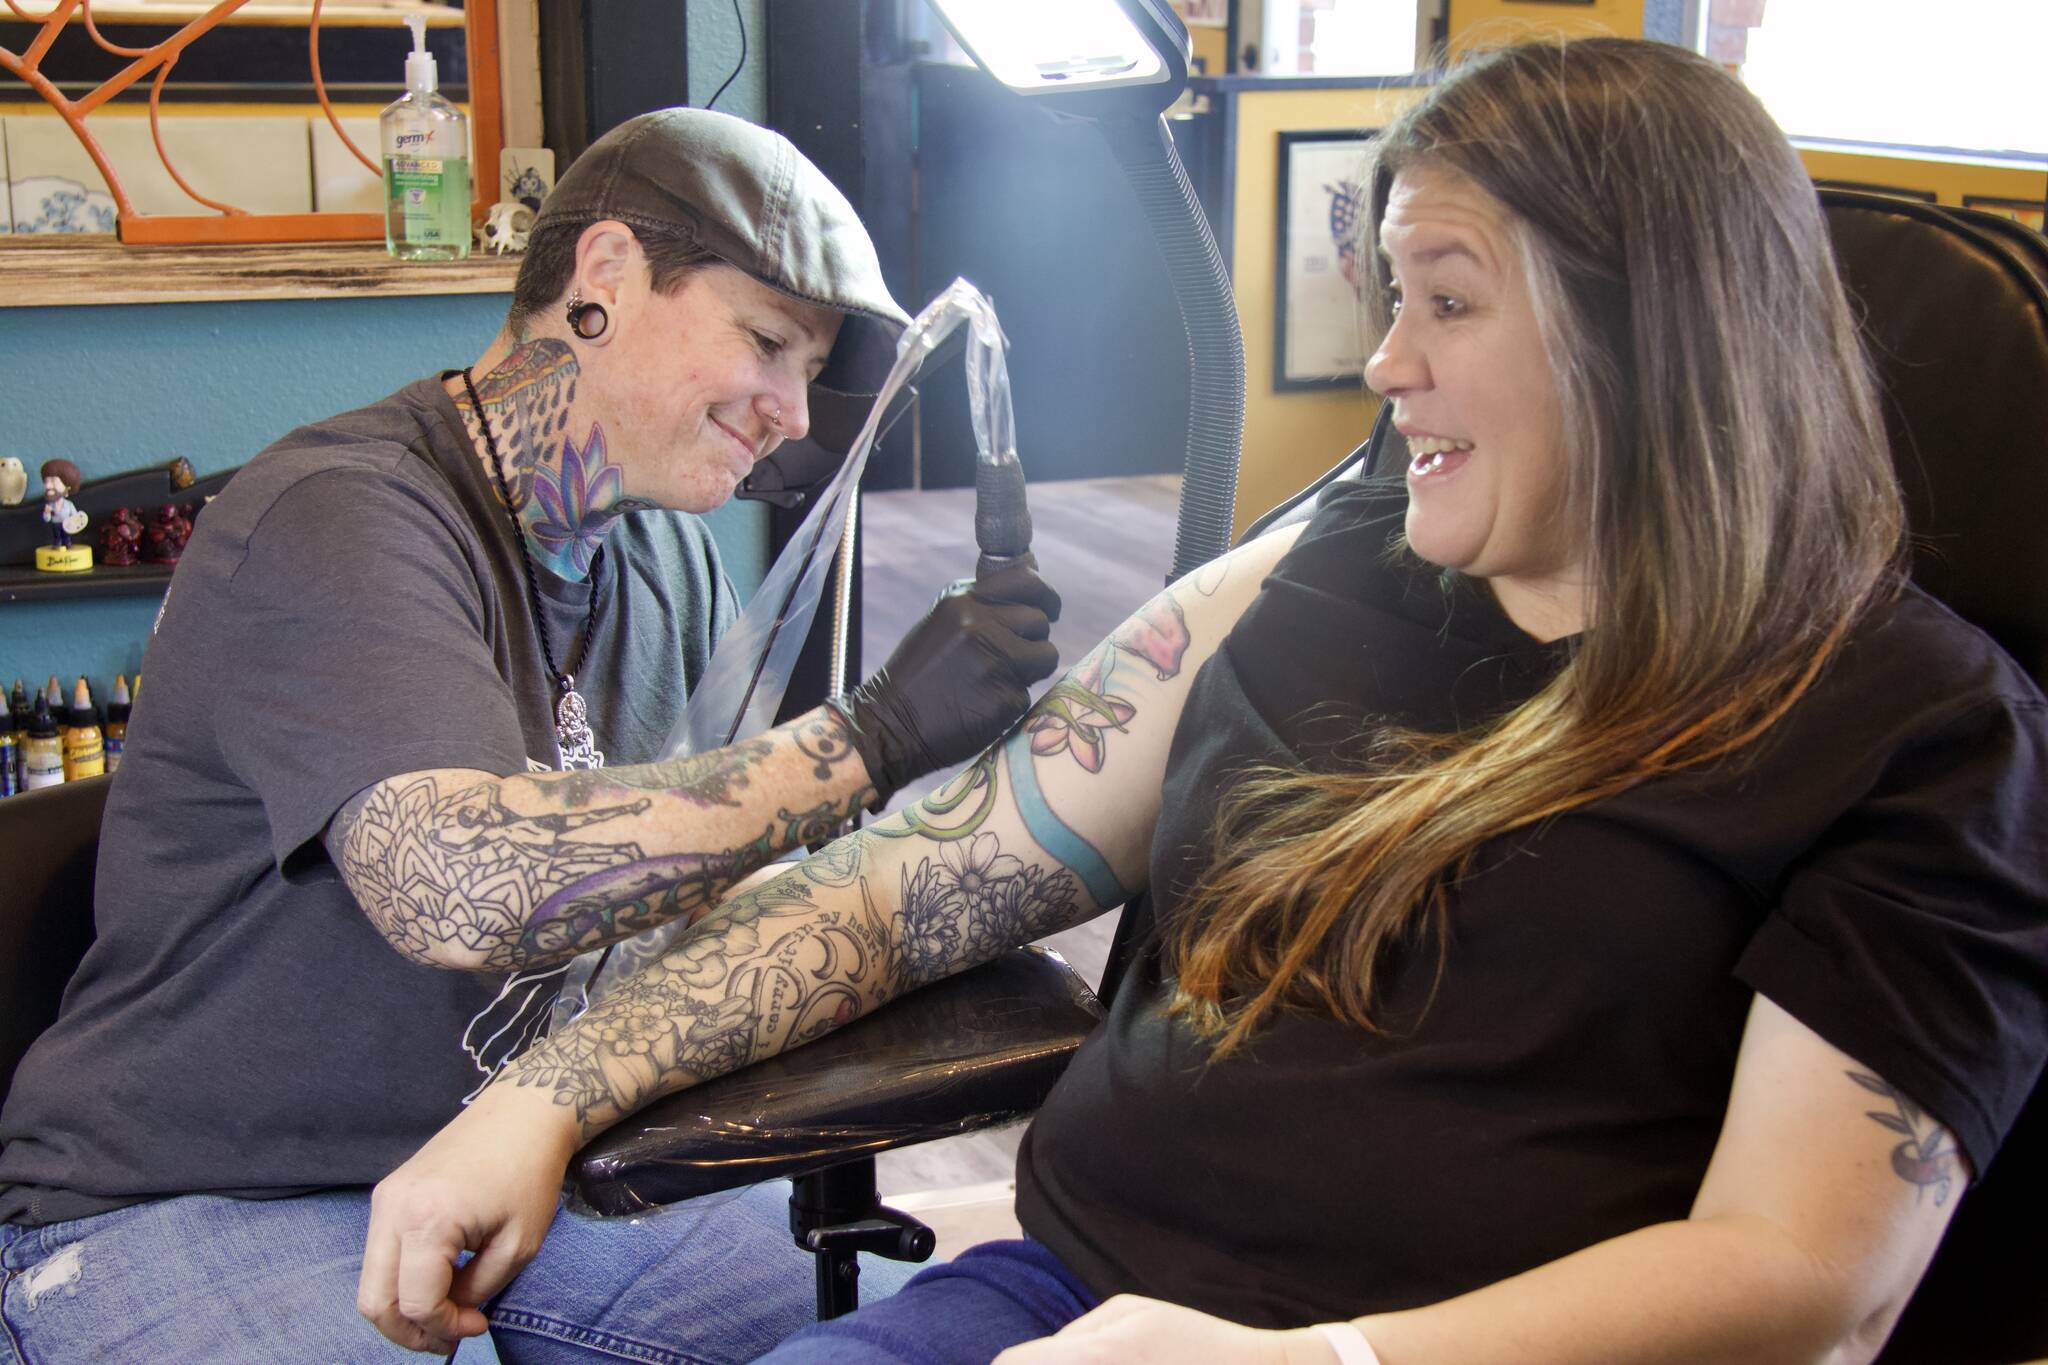 Tattoo shop moves, expands after decade | Whidbey News-Times